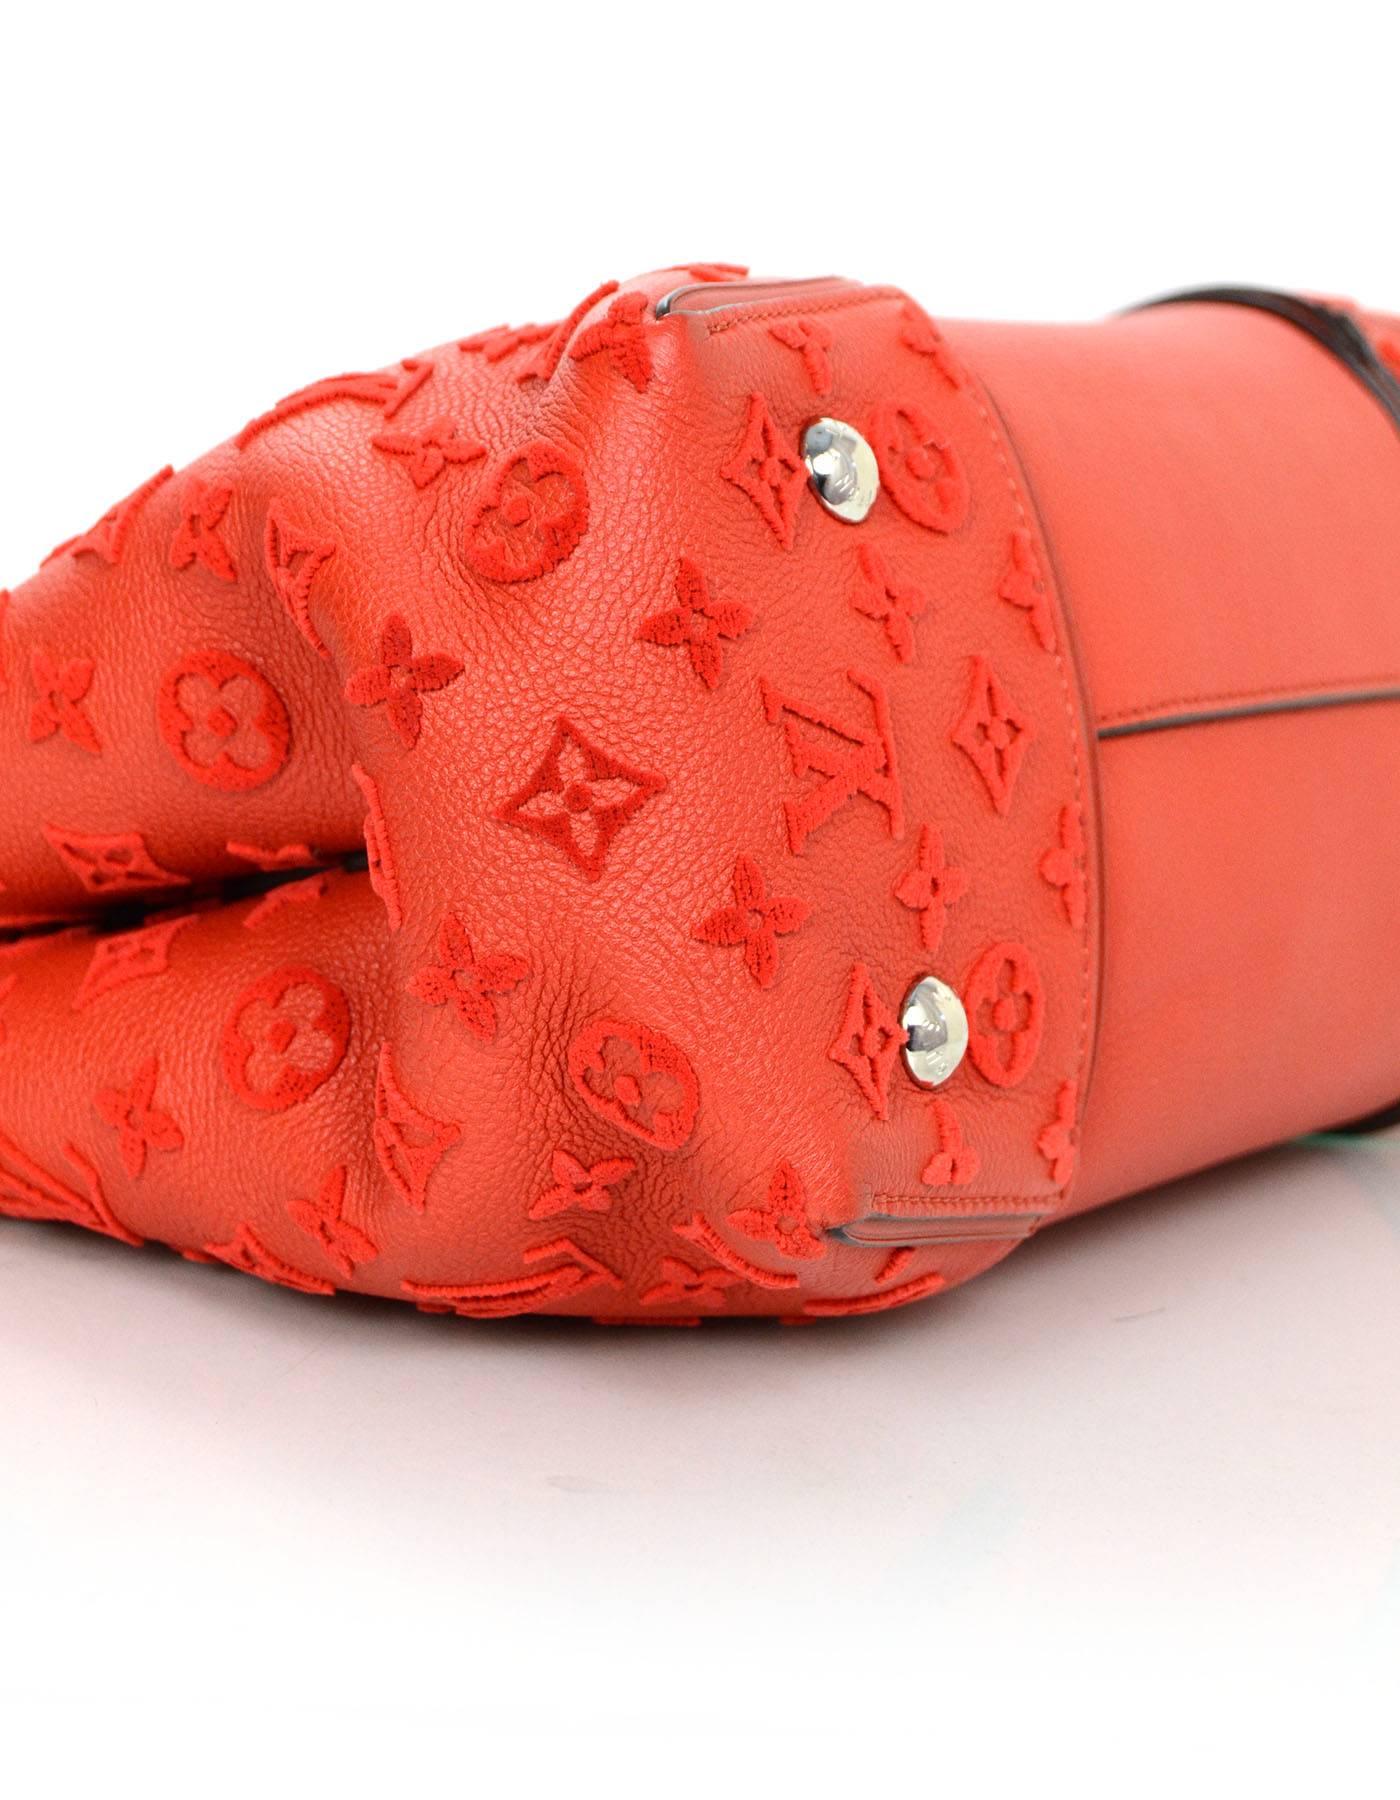 Women's Louis Vuitton Red Leather Velours W PM Tote Bag rt. $4, 850